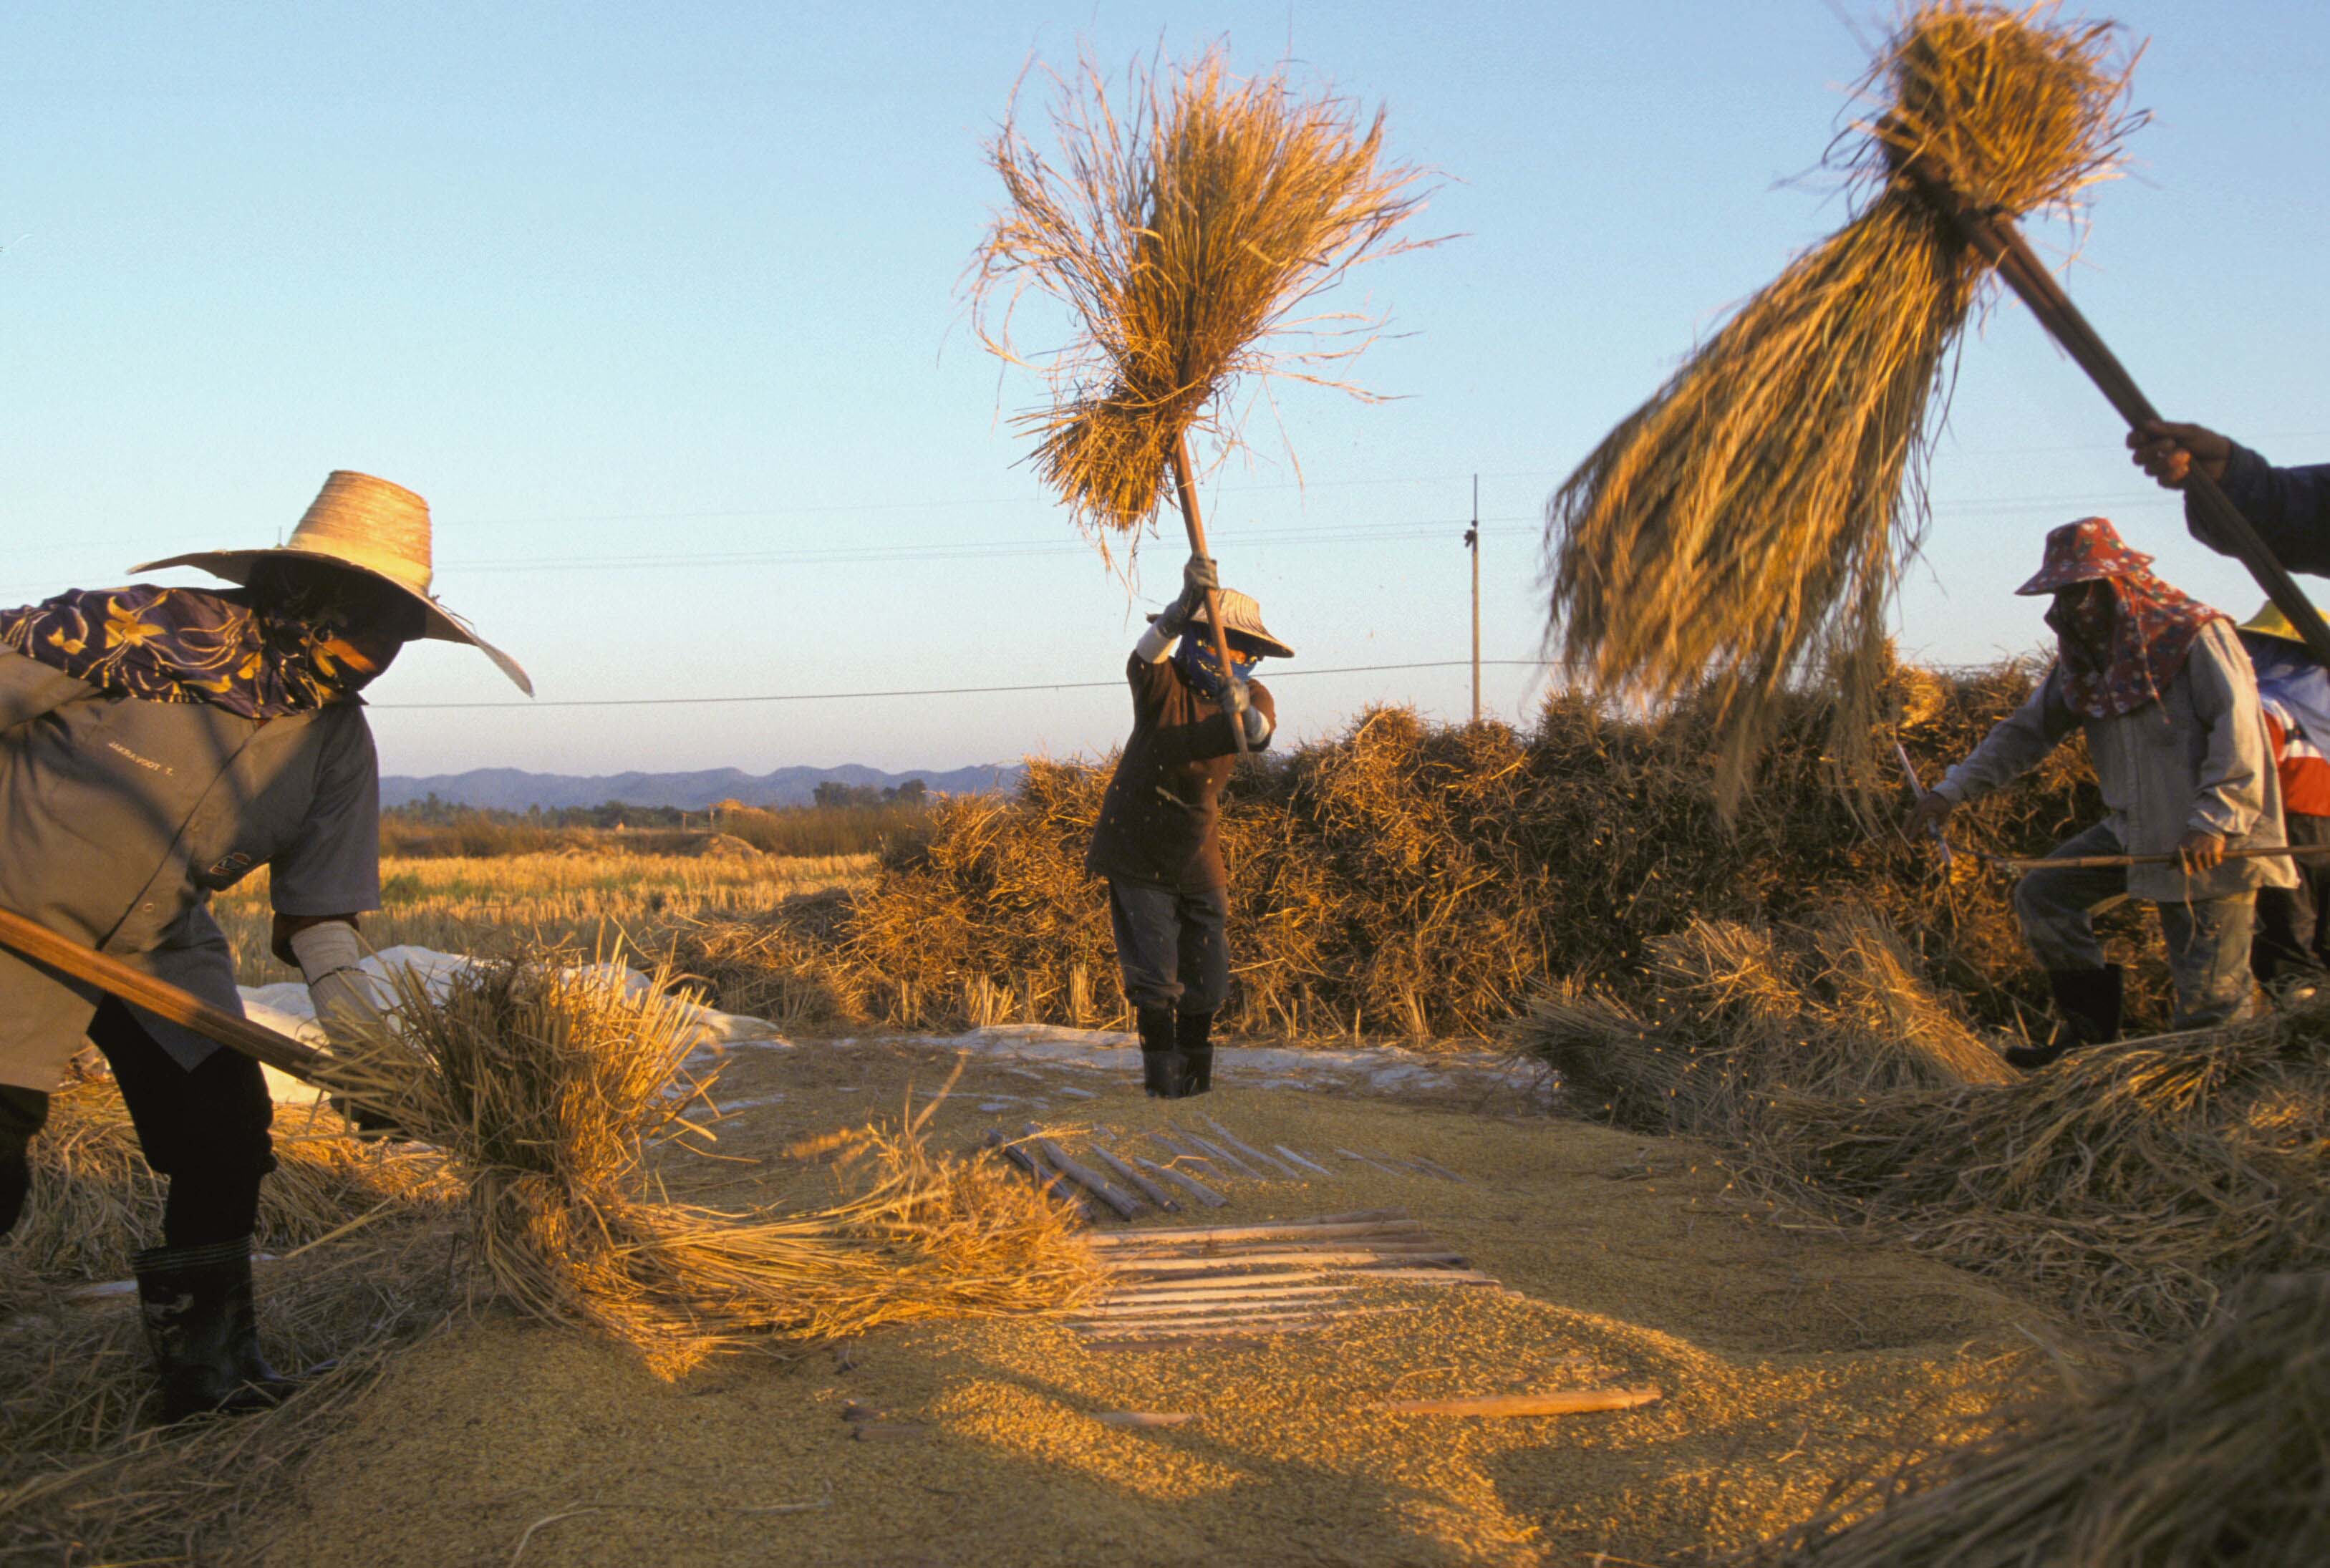 Four people, covering from the sun, threshing rice in a field in Lampang.